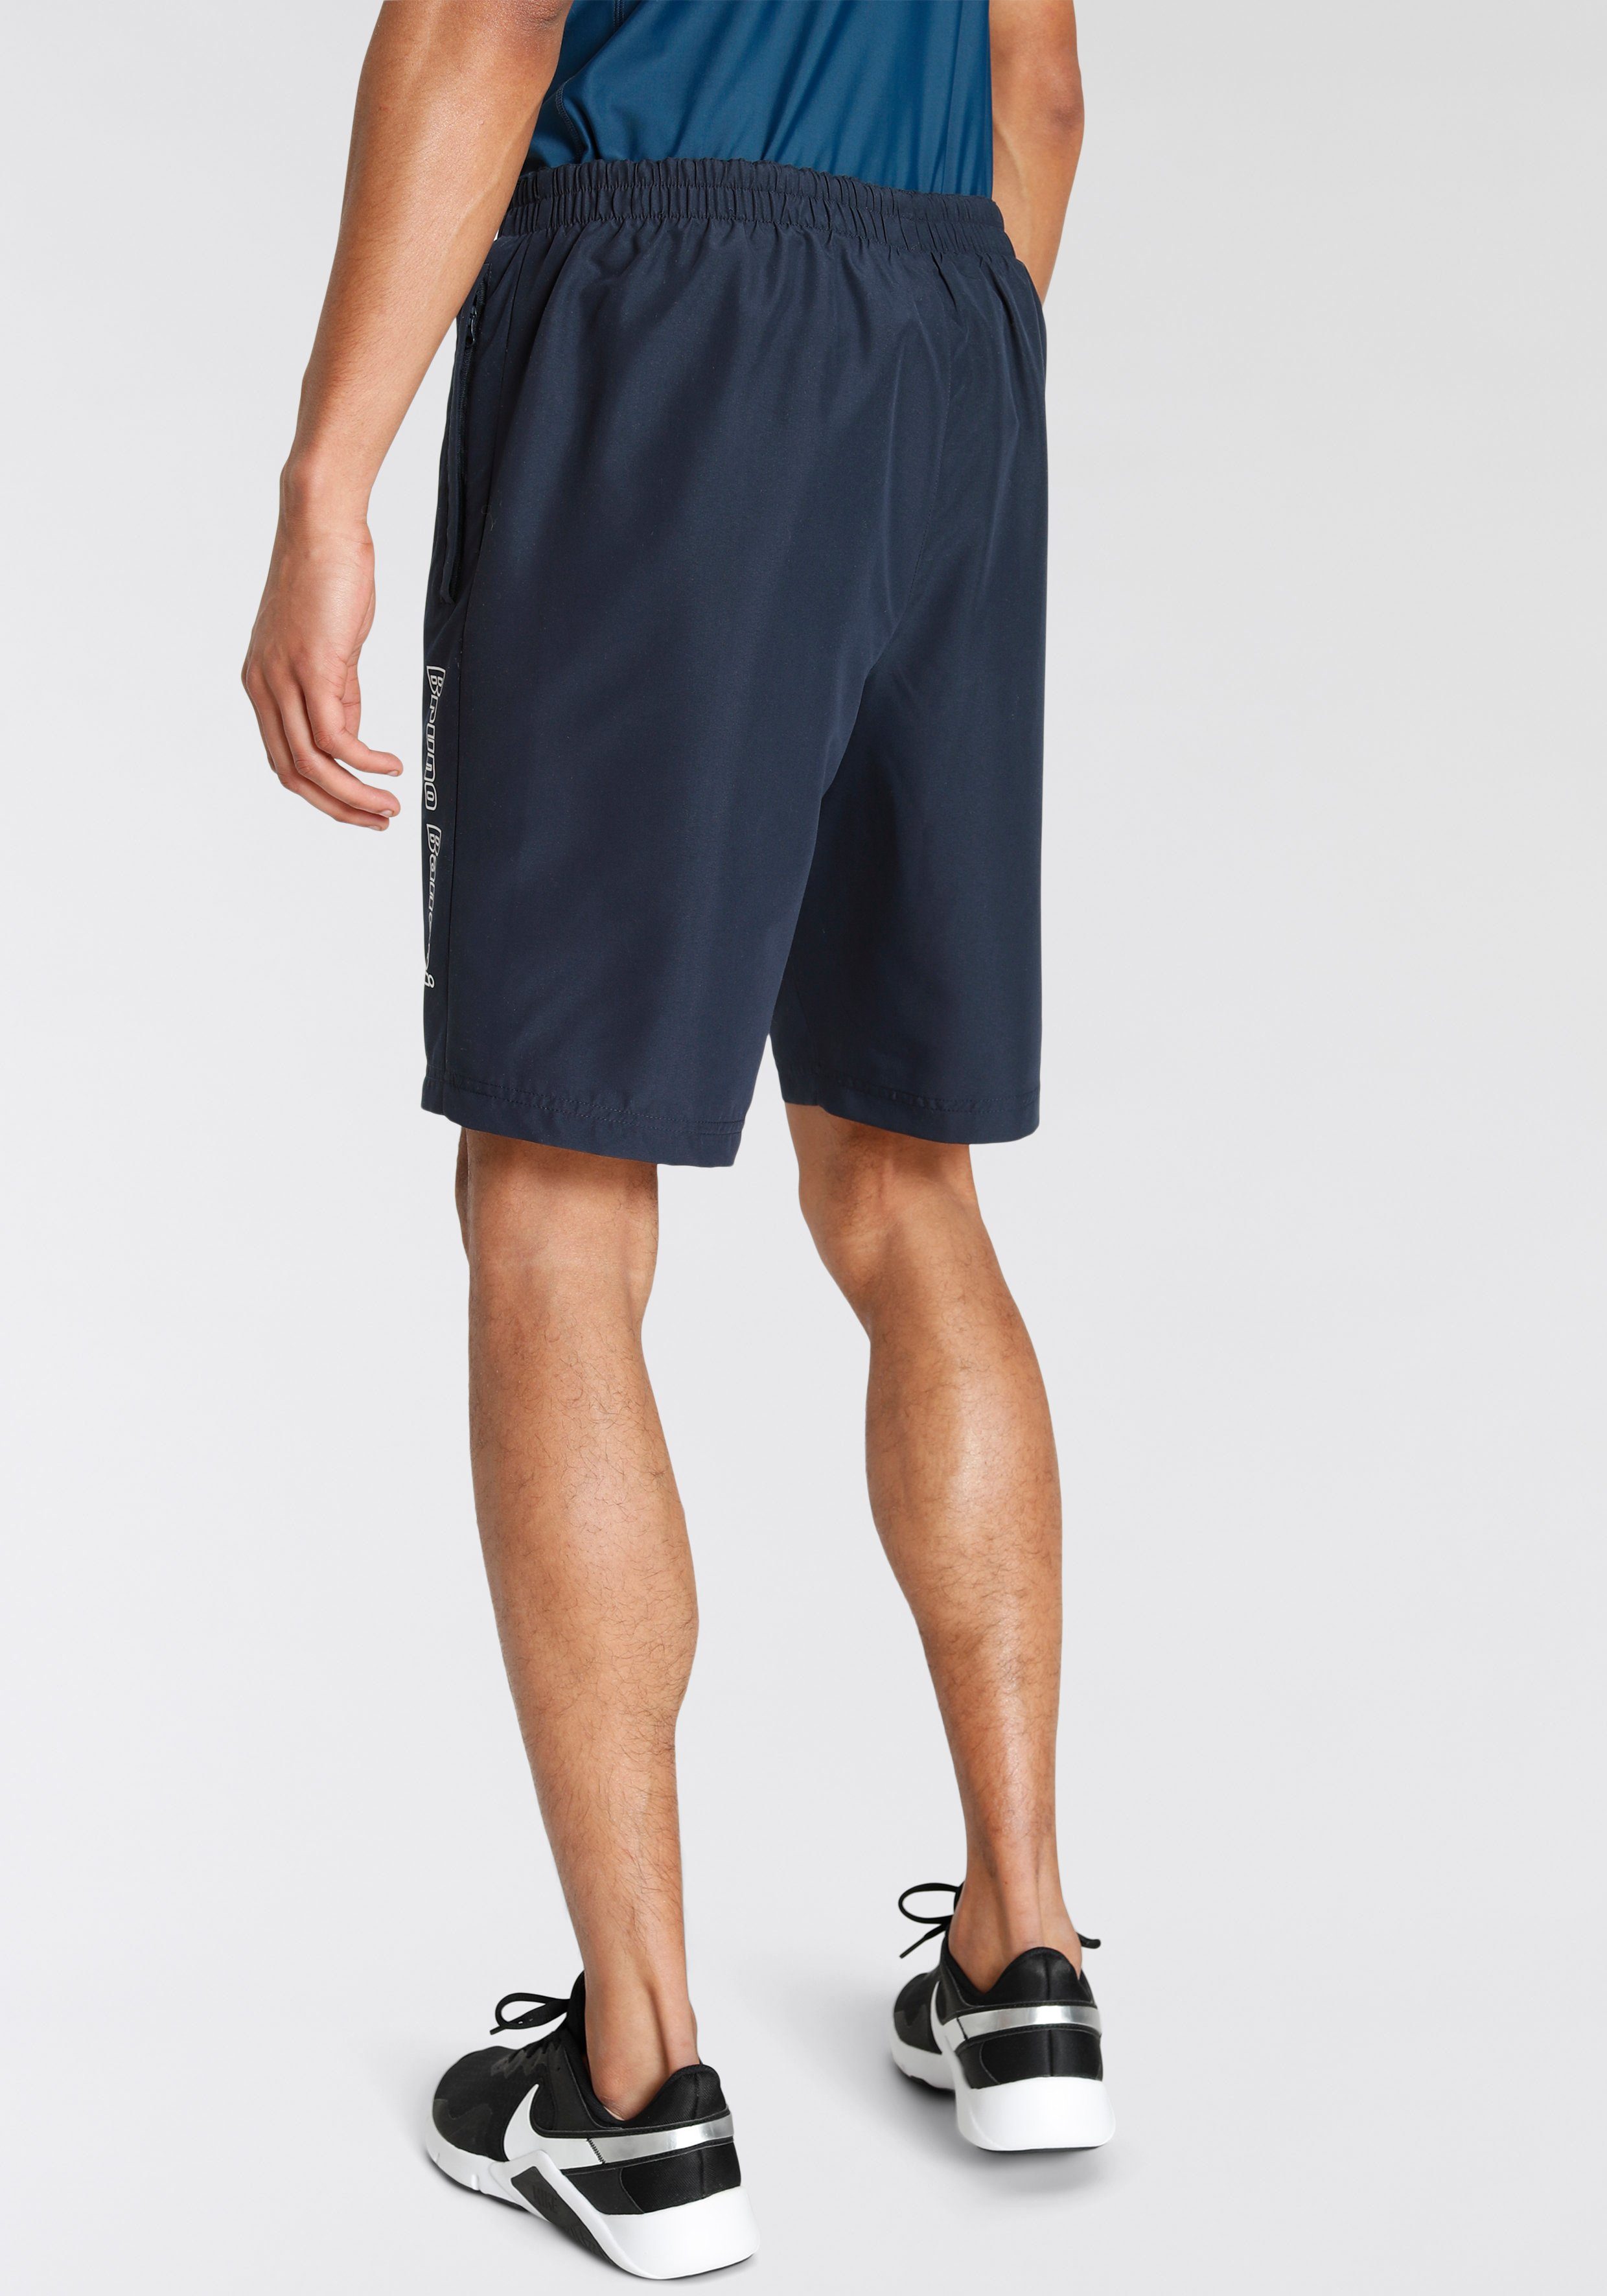 Funktionsshorts recyceltem Material Banani aus Bruno Navy